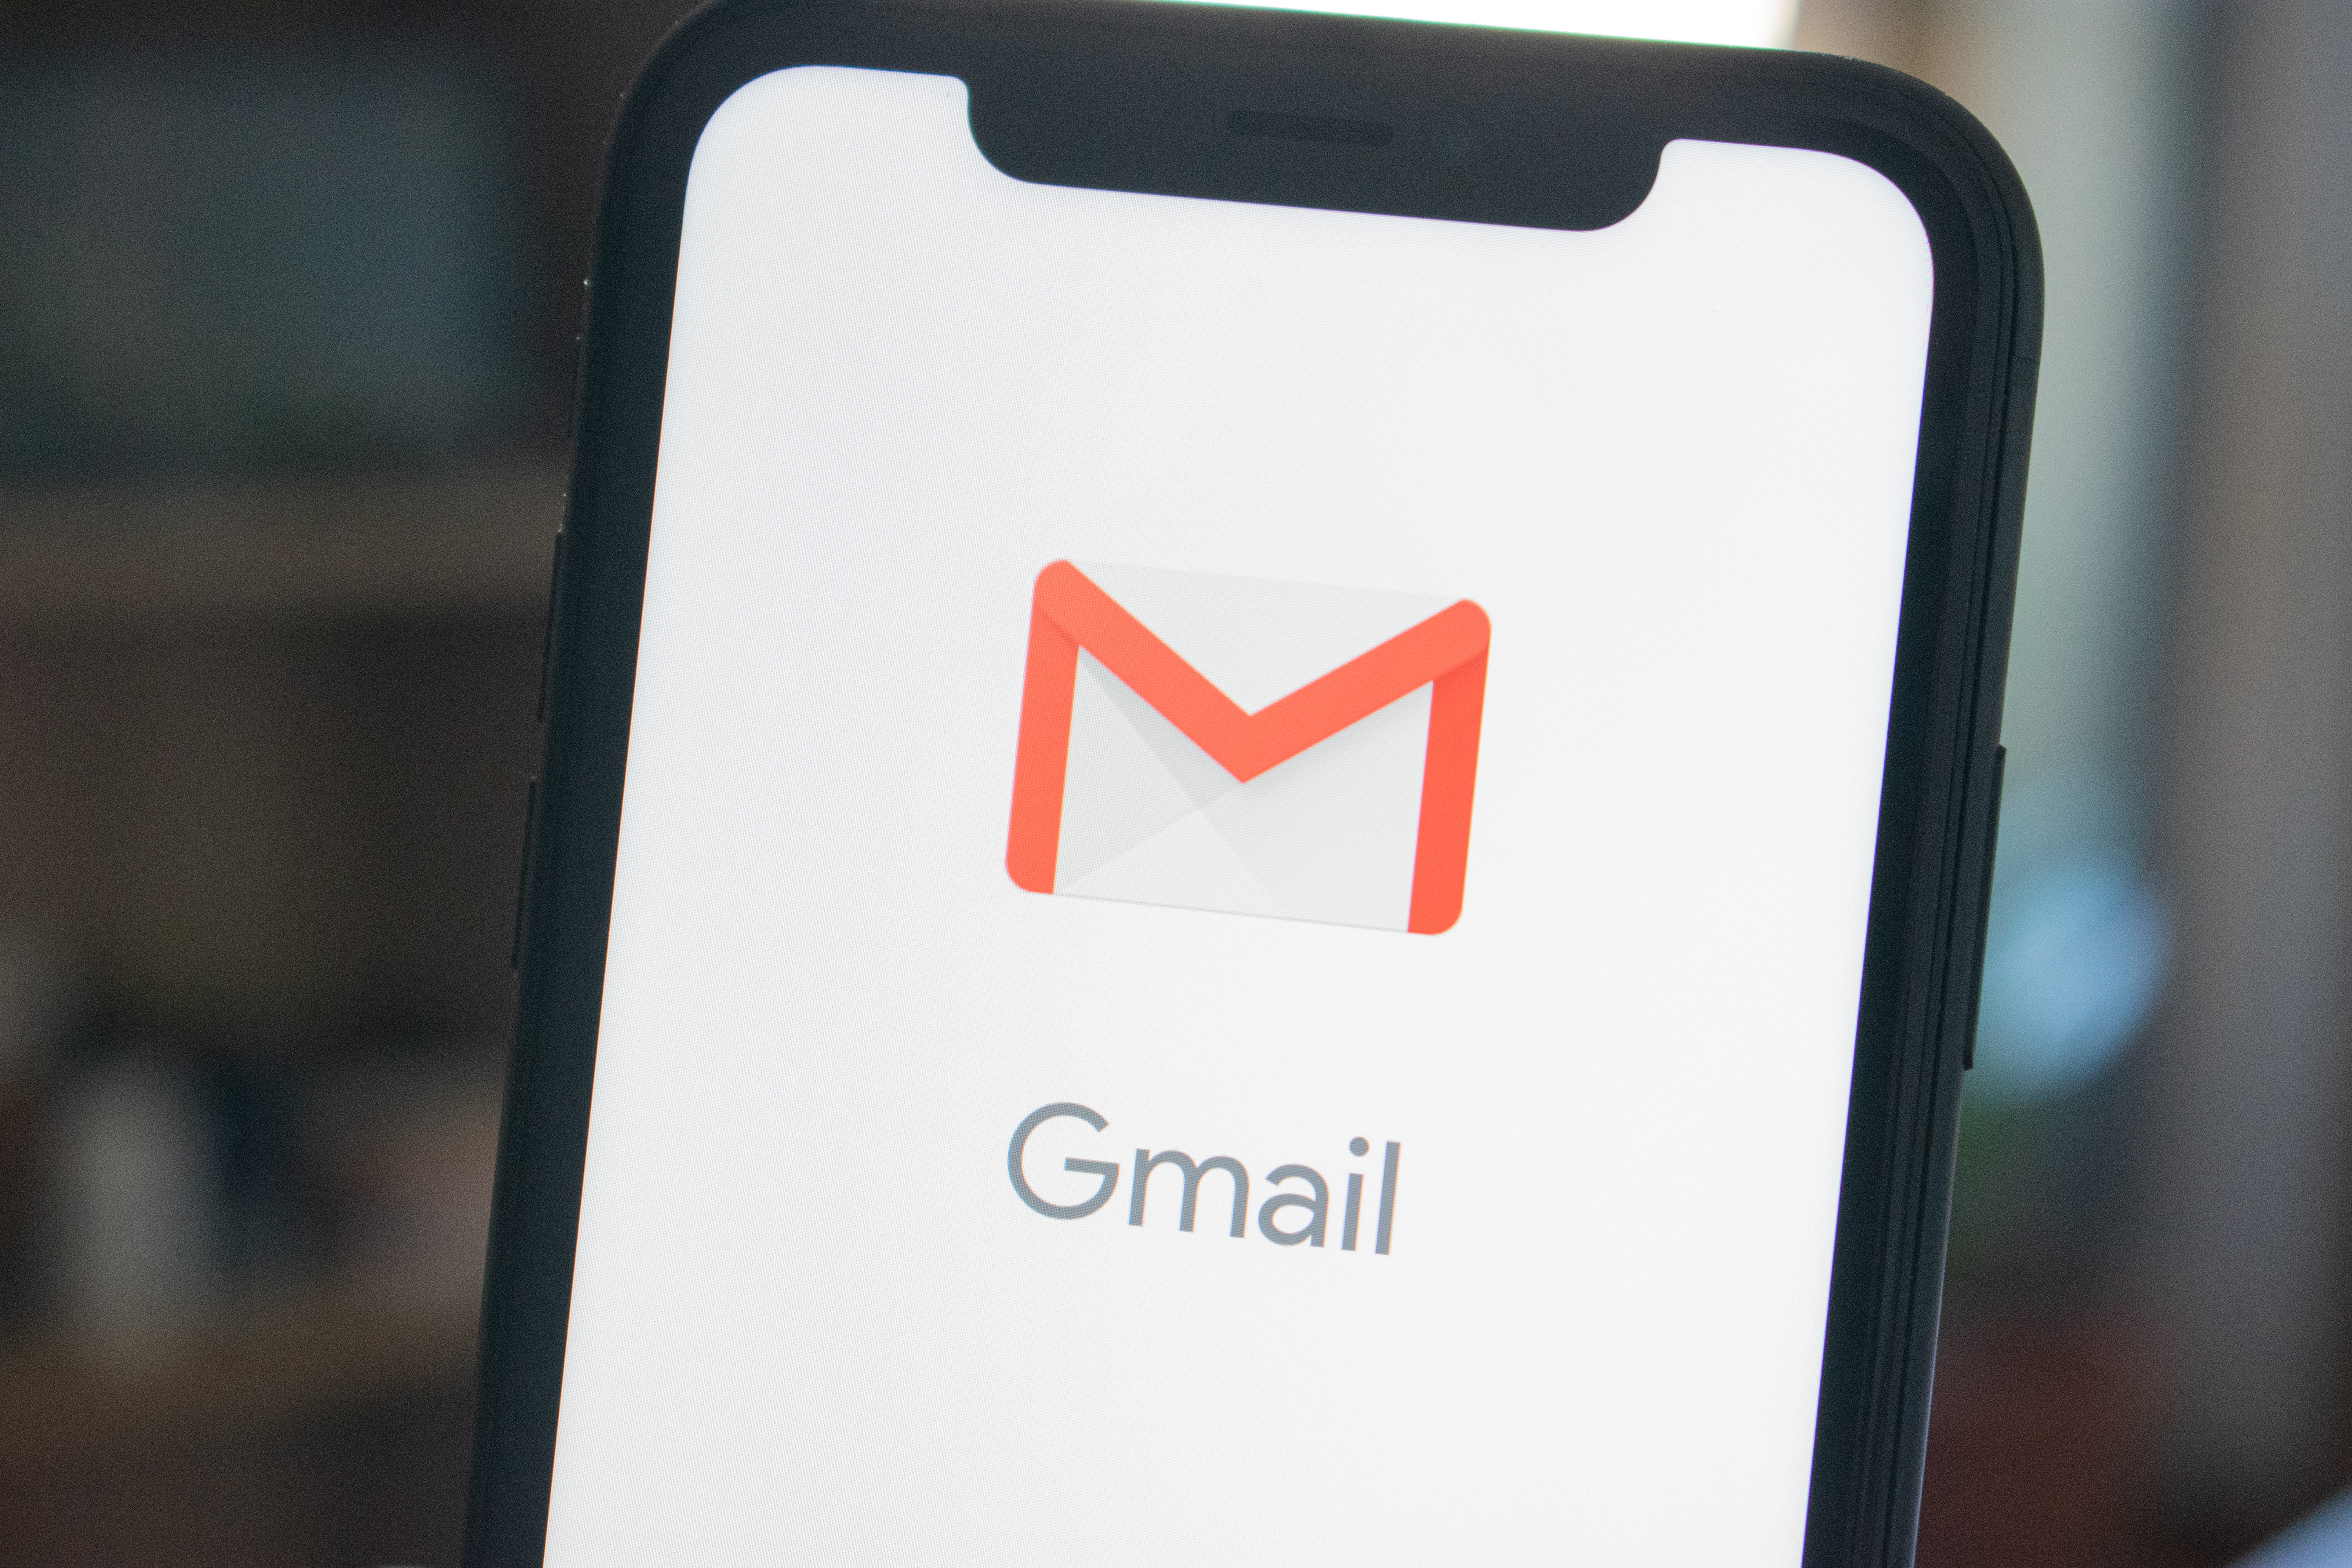 Gmail open on smartphone